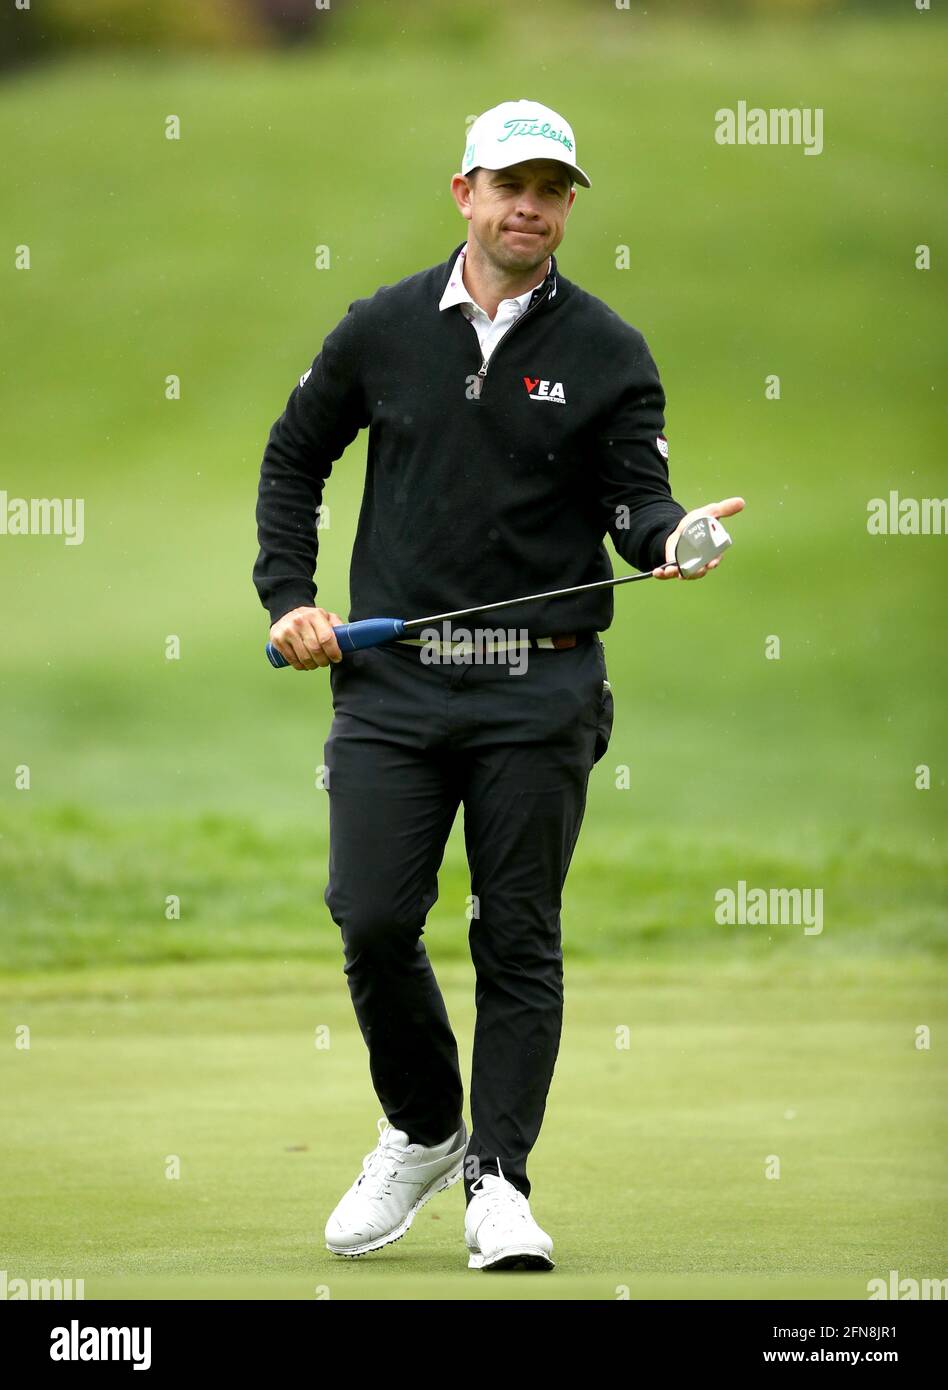 South Africa's Louis De Jager on the sixteenth green during day four of the Betfred British Masters at The Belfry, Sutton Coldfield. Picture date: Saturday May 15, 2021. Stock Photo